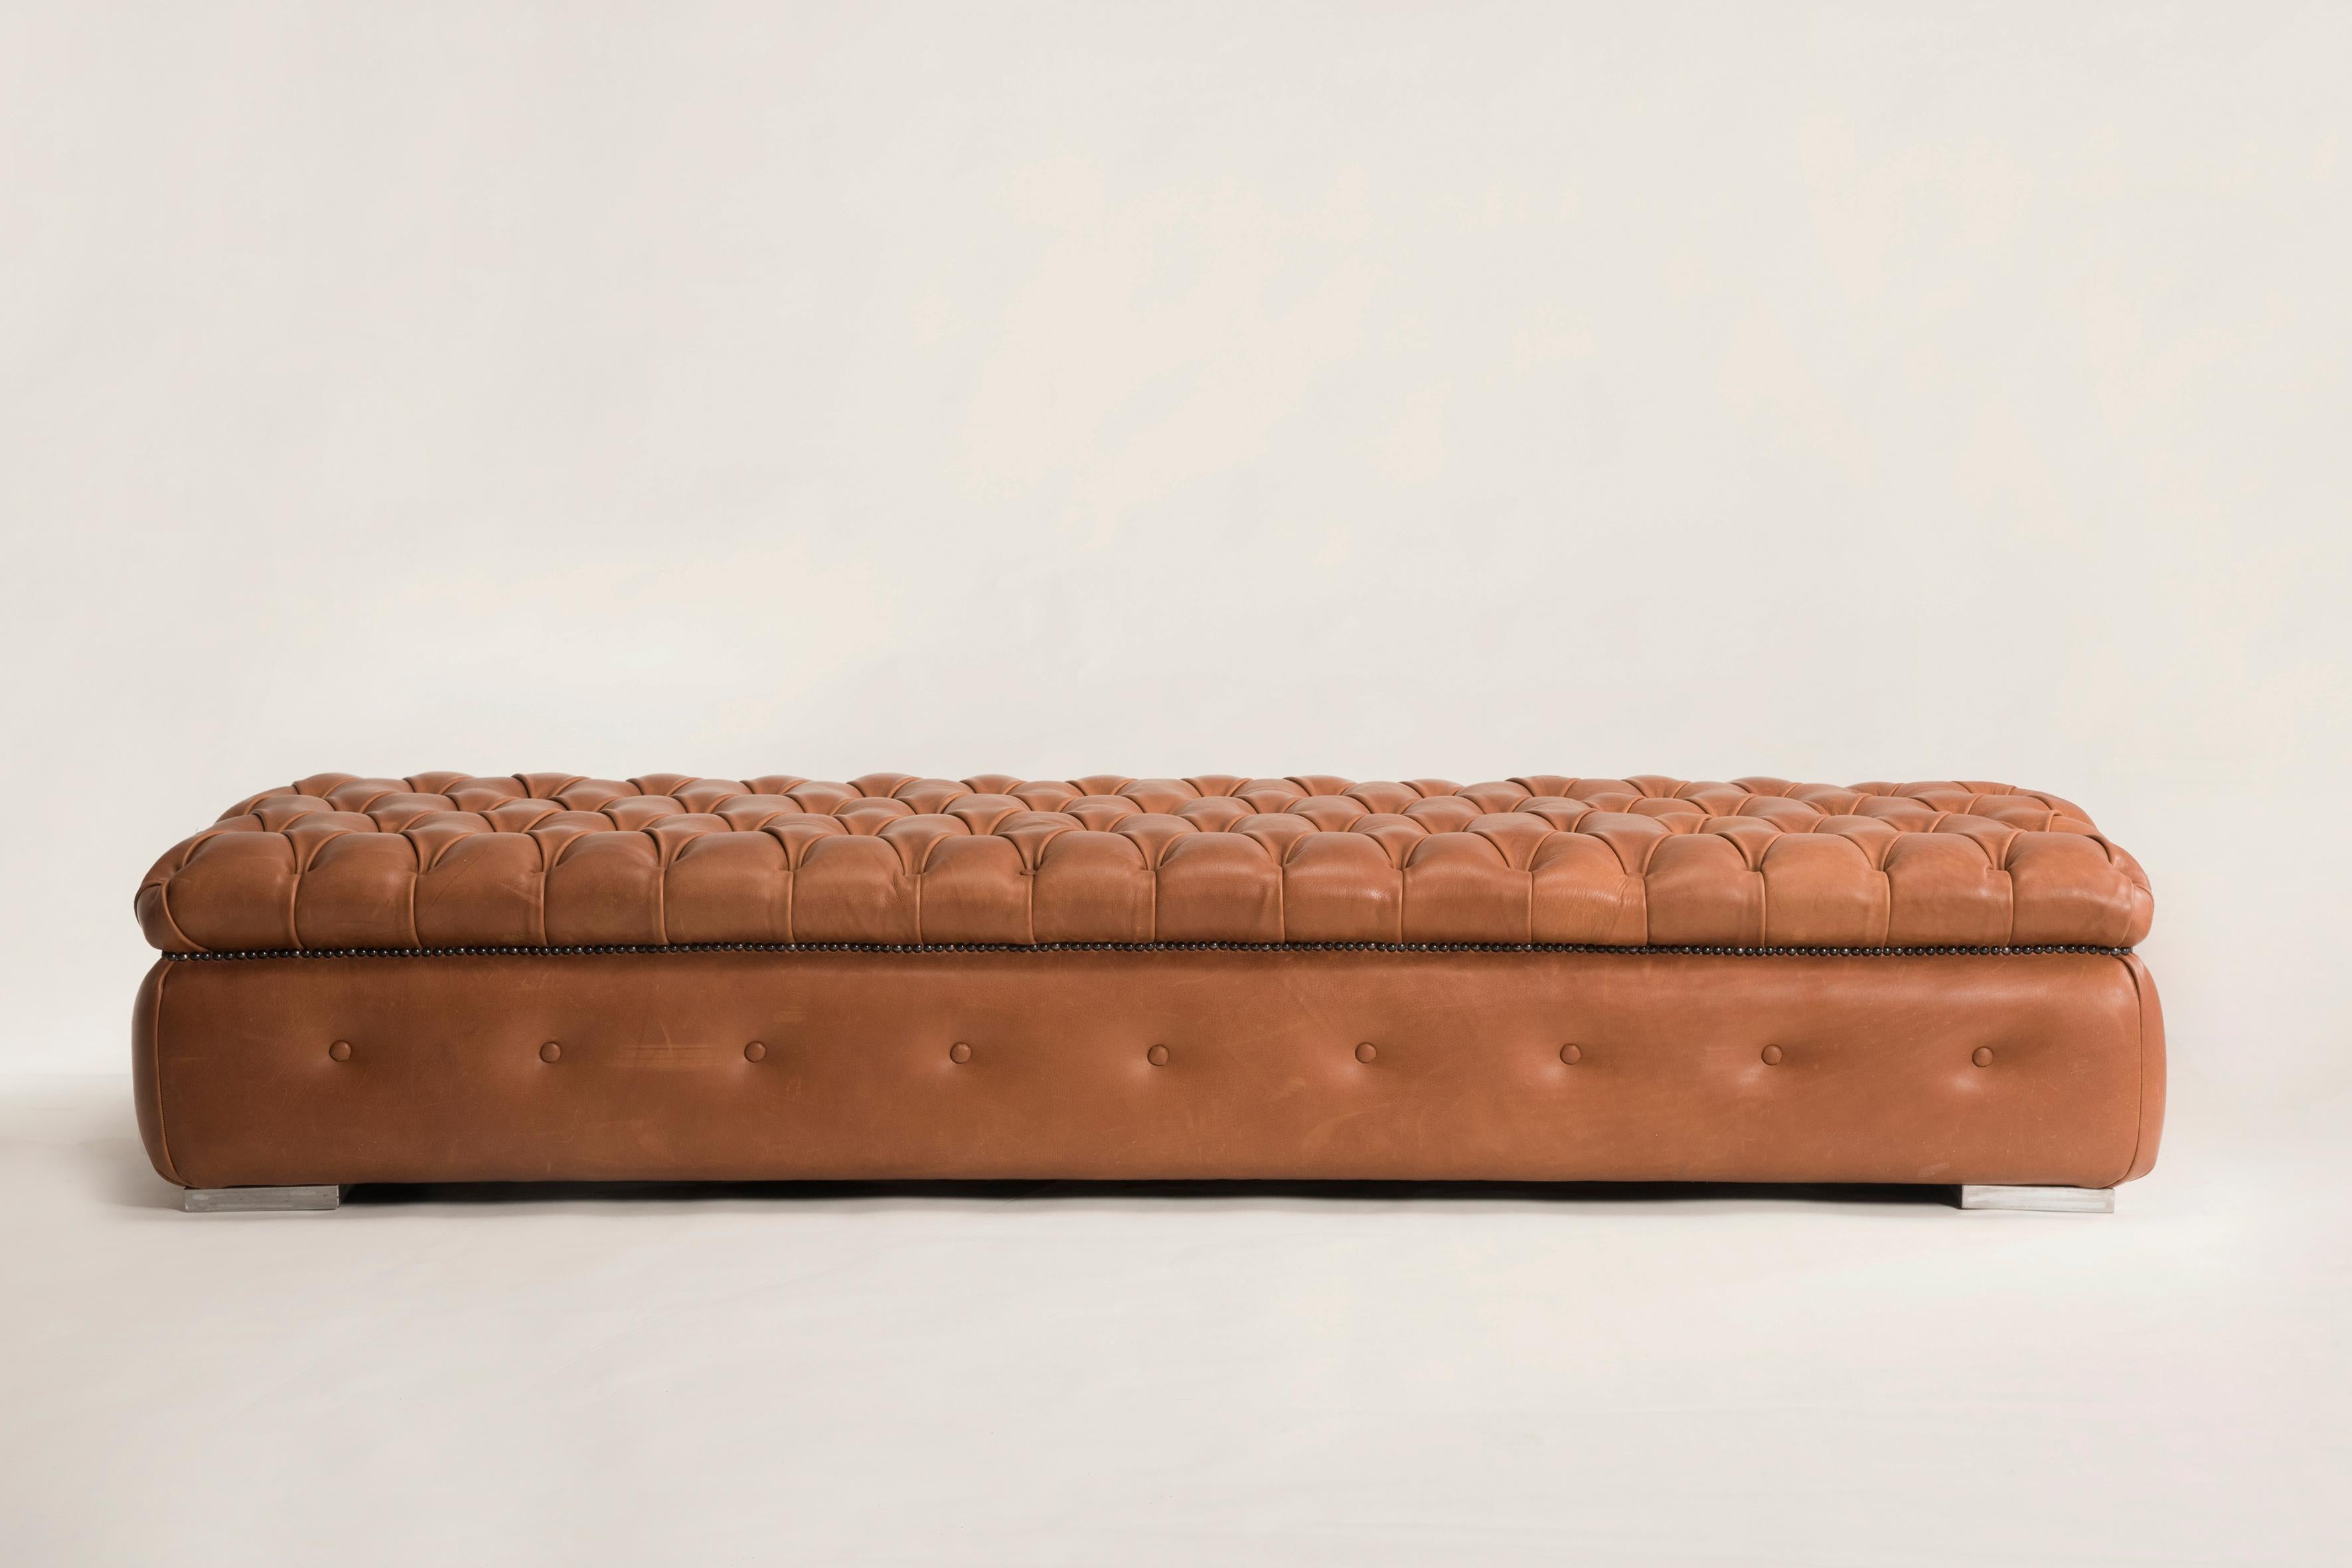 Italian Customizable Brown Leather Capitonné Pouf Available in Other Colors Shape Size For Sale